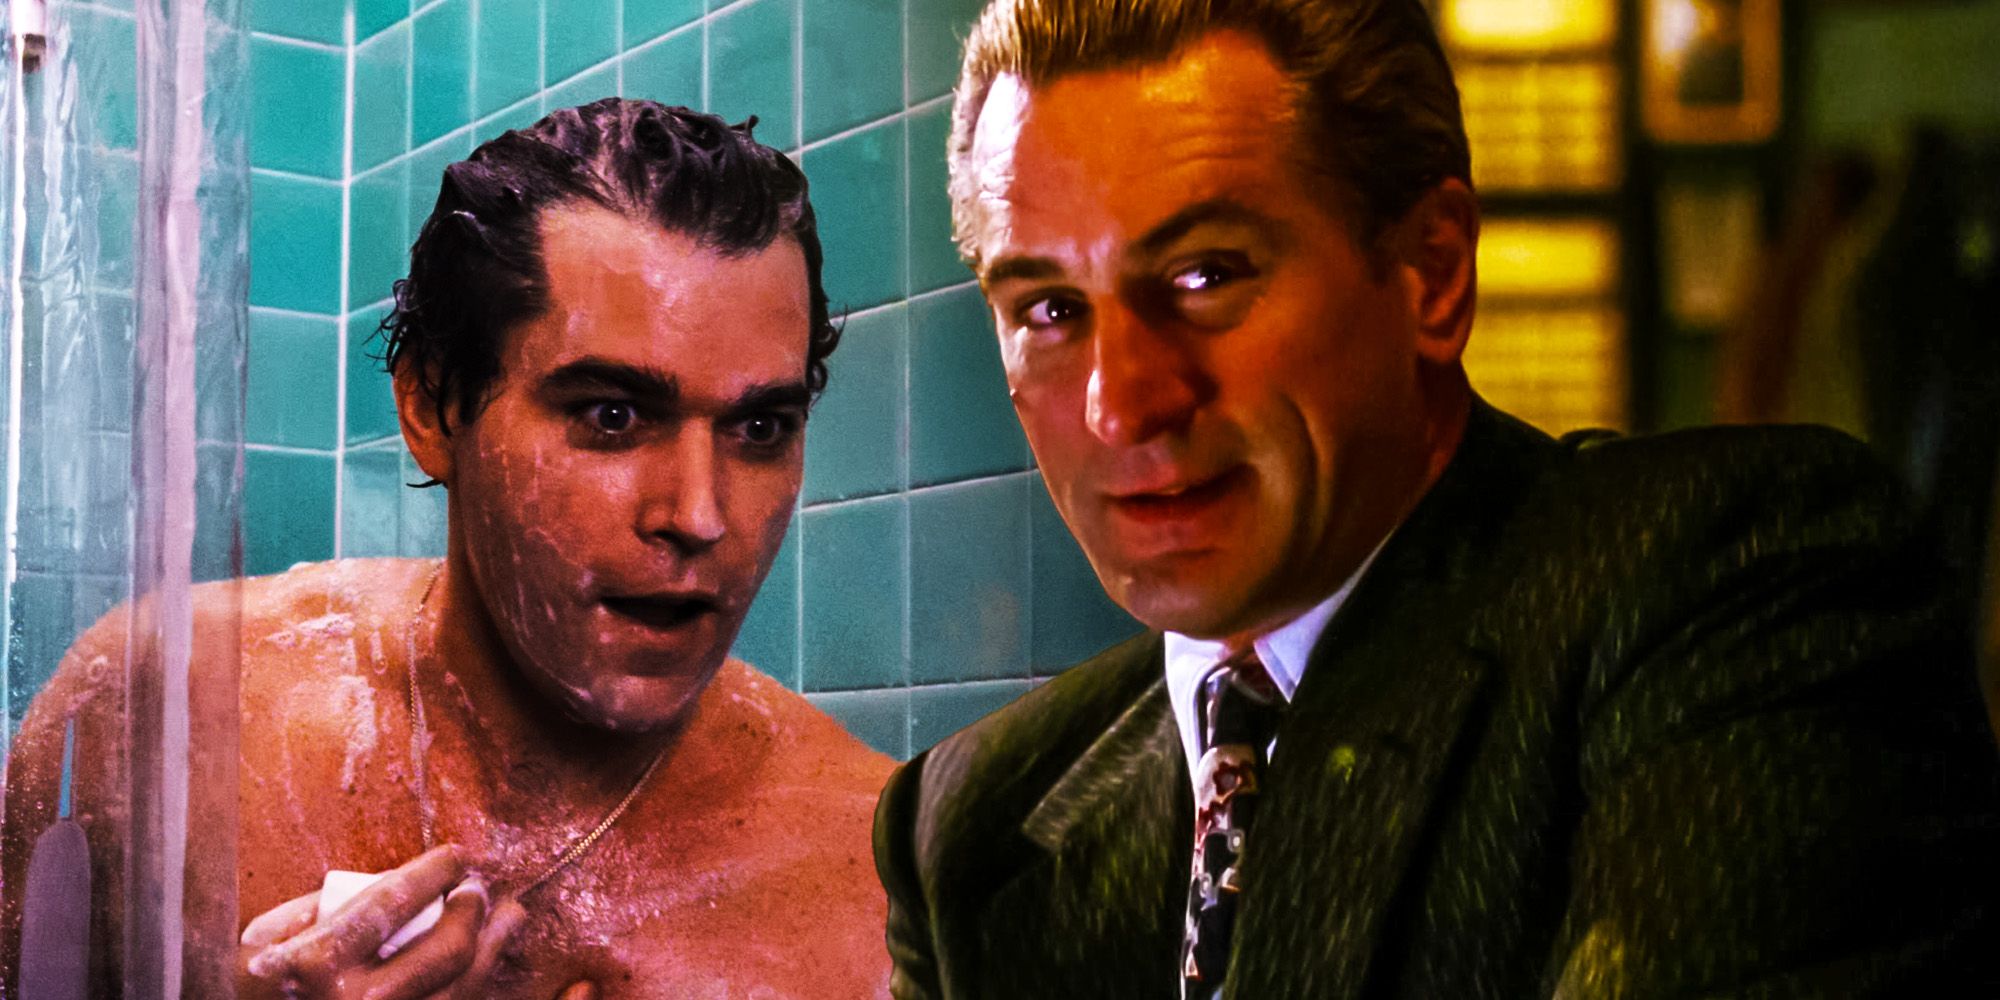 Goodfellas Henry in shower Jimmy conway